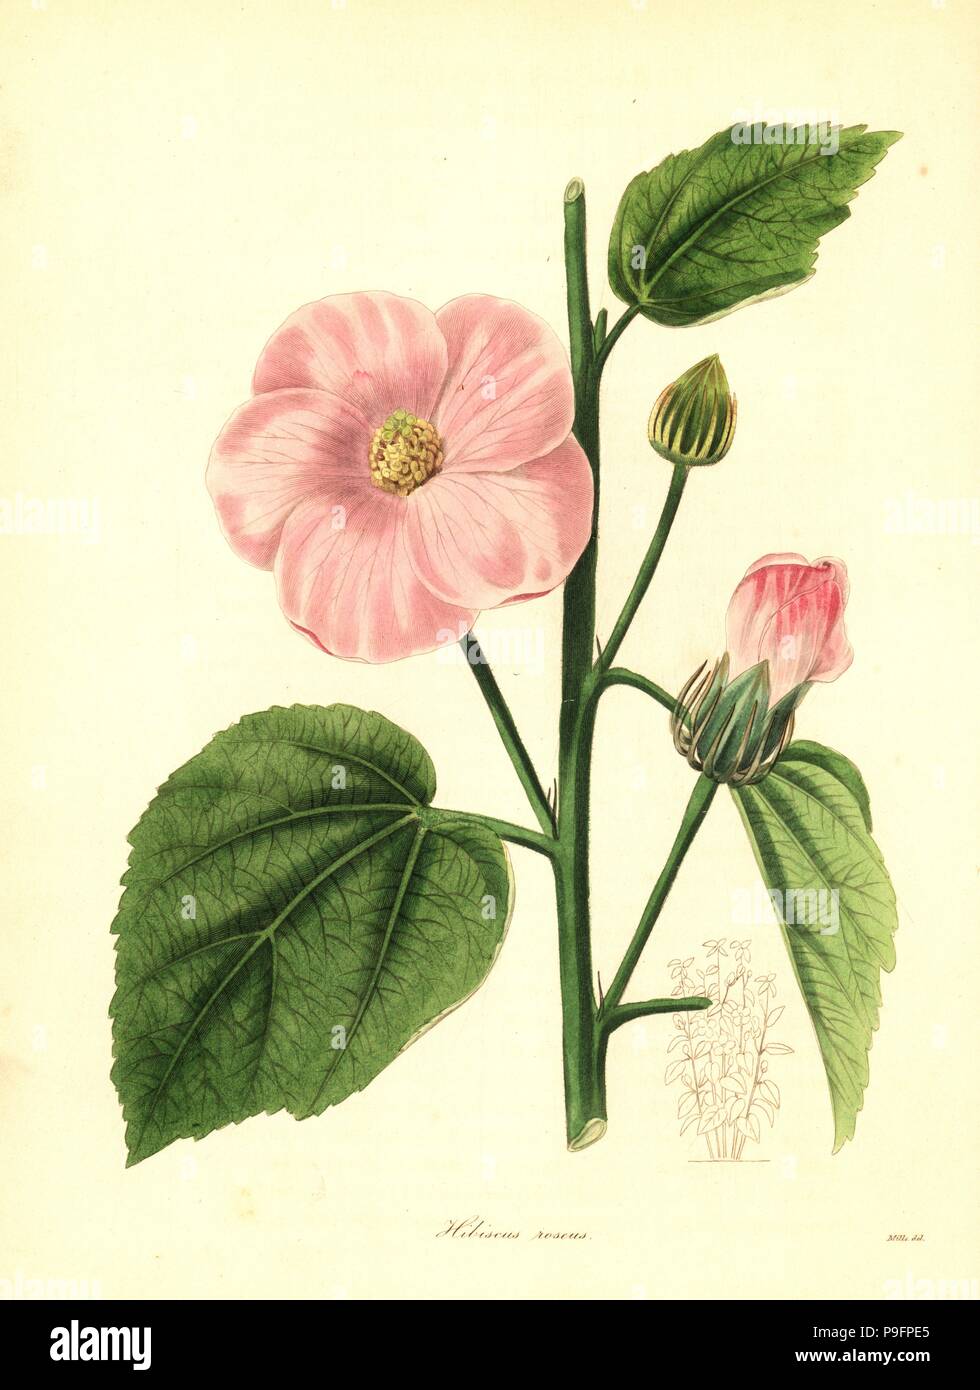 Rose-coloured flowered hibiscus, Hibiscus roseus. Handcoloured copperplate engraving after a botanical illustration by Mills from Benjamin Maund and the Rev. John Stevens Henslow's The Botanist, London, 1836. Stock Photo